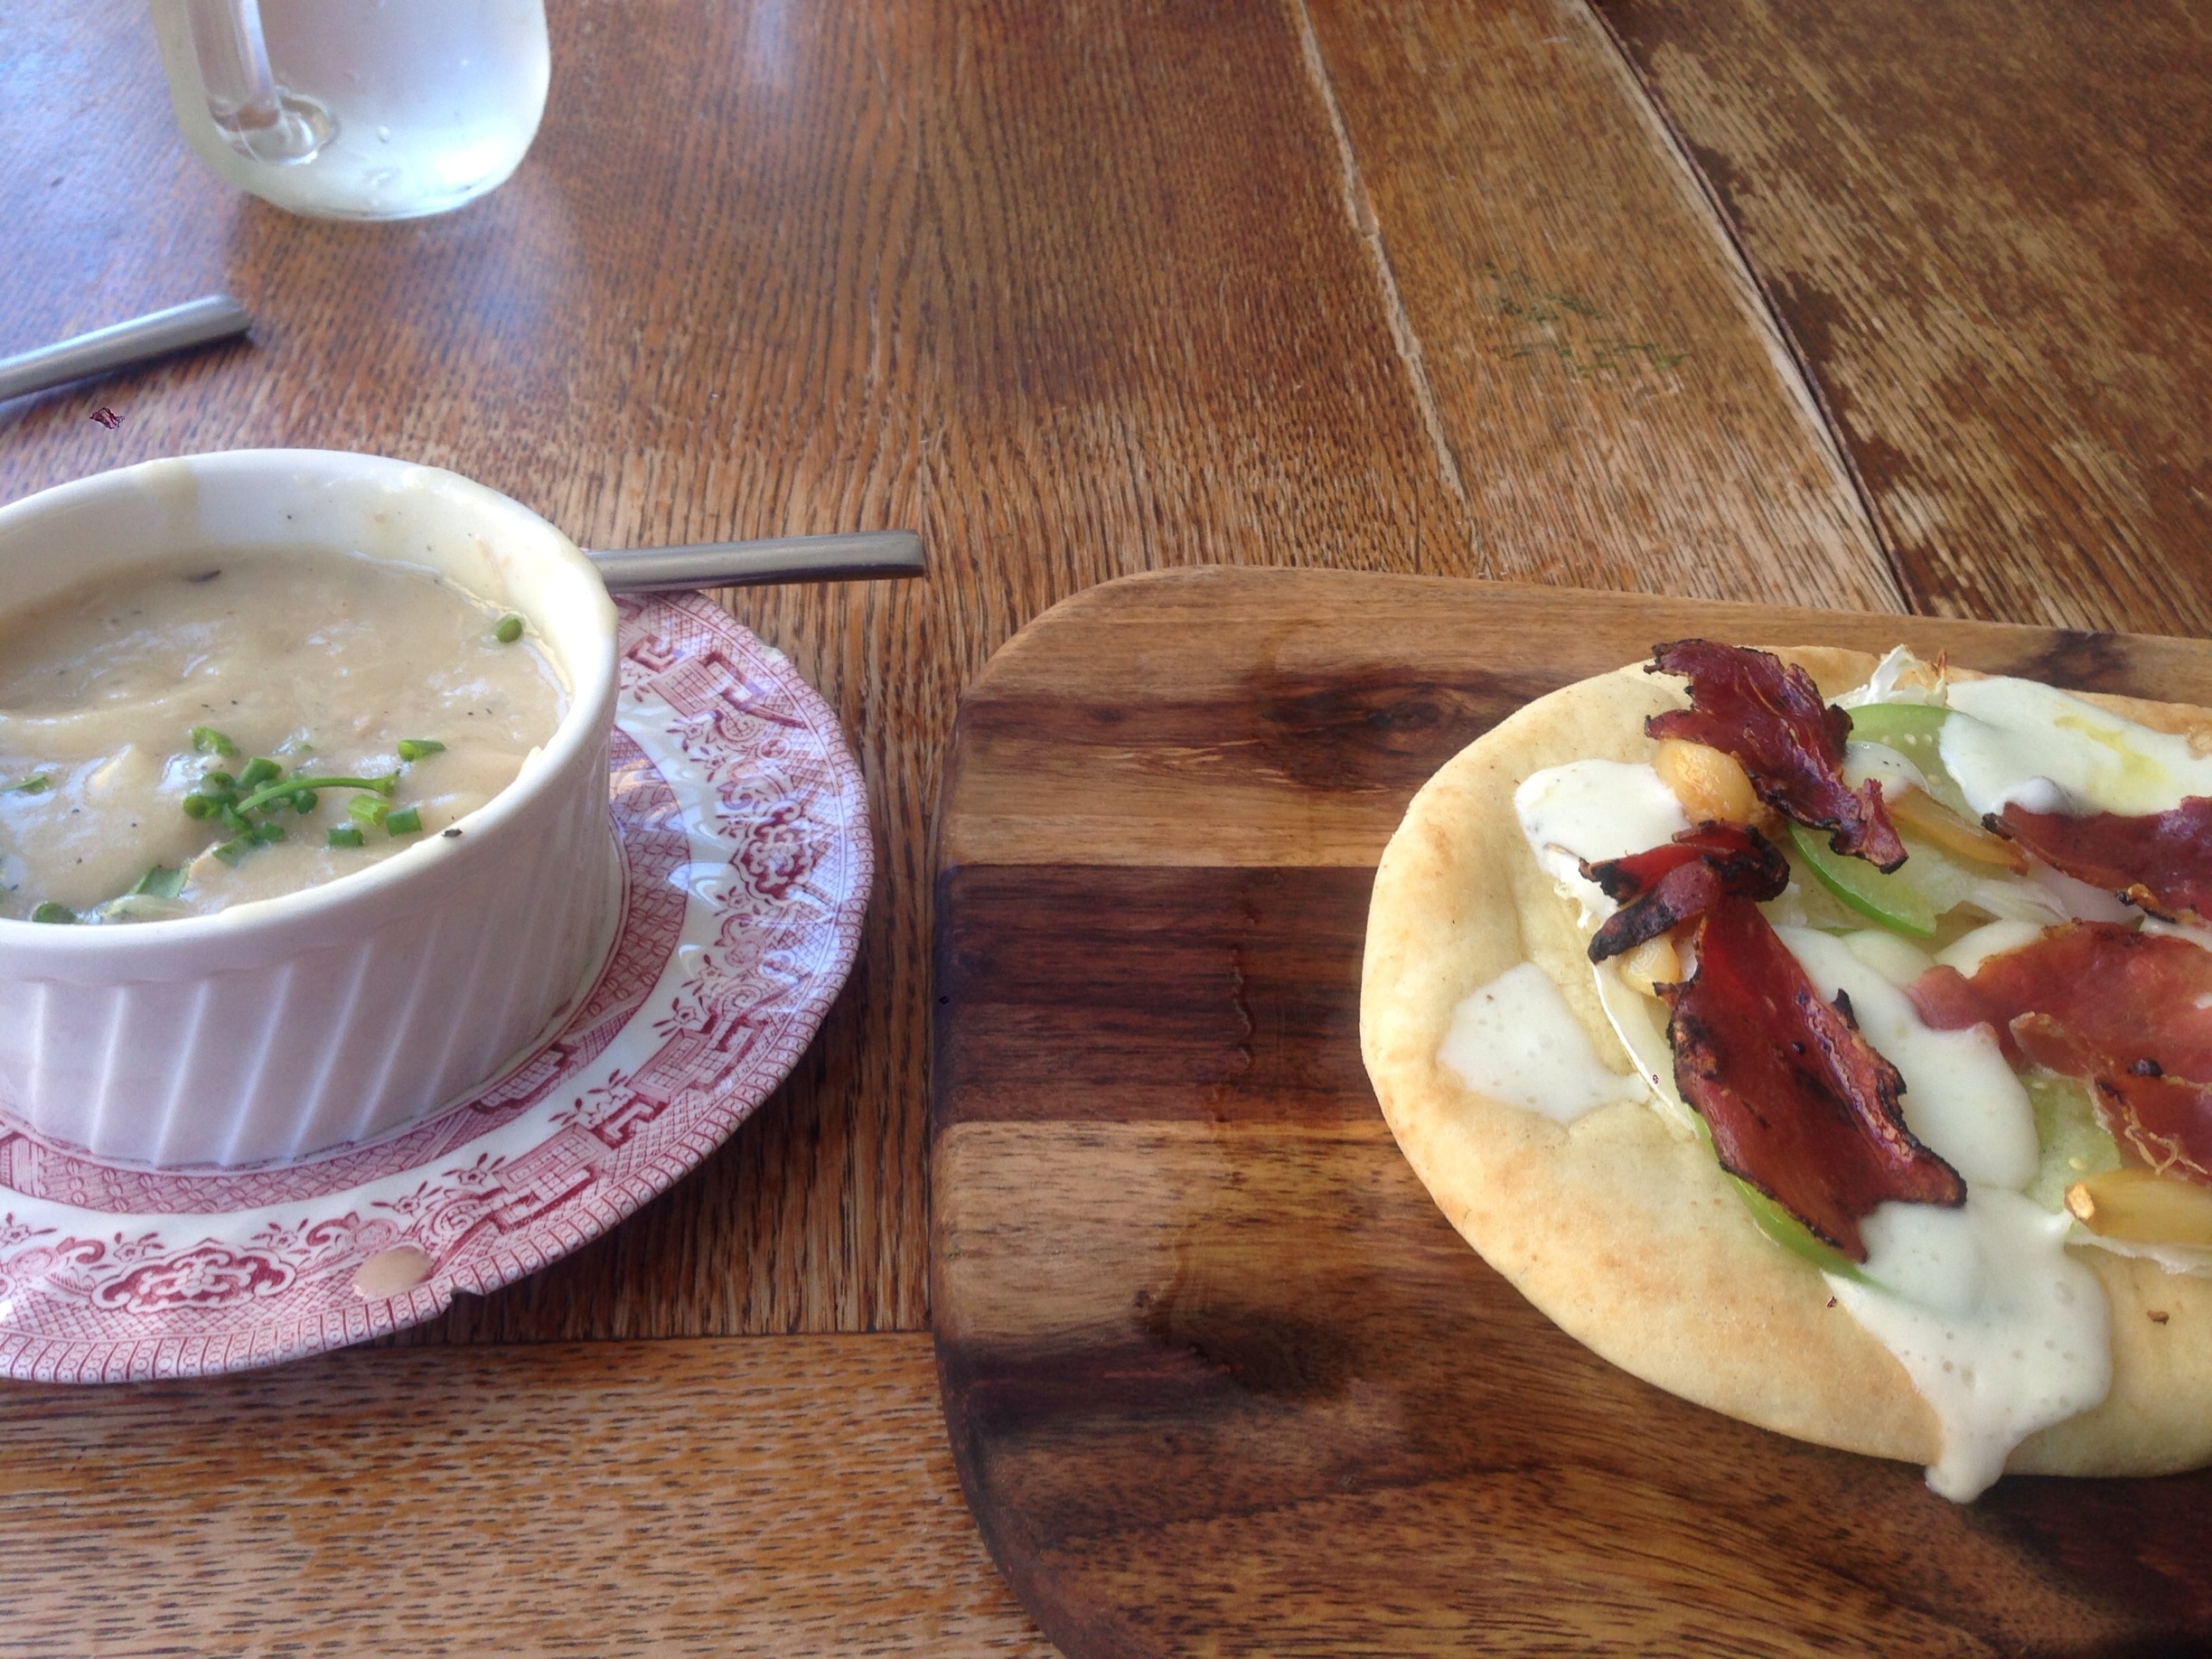 Duck and dumplings soup (amazing) and flat bread.  Get here and way this now!